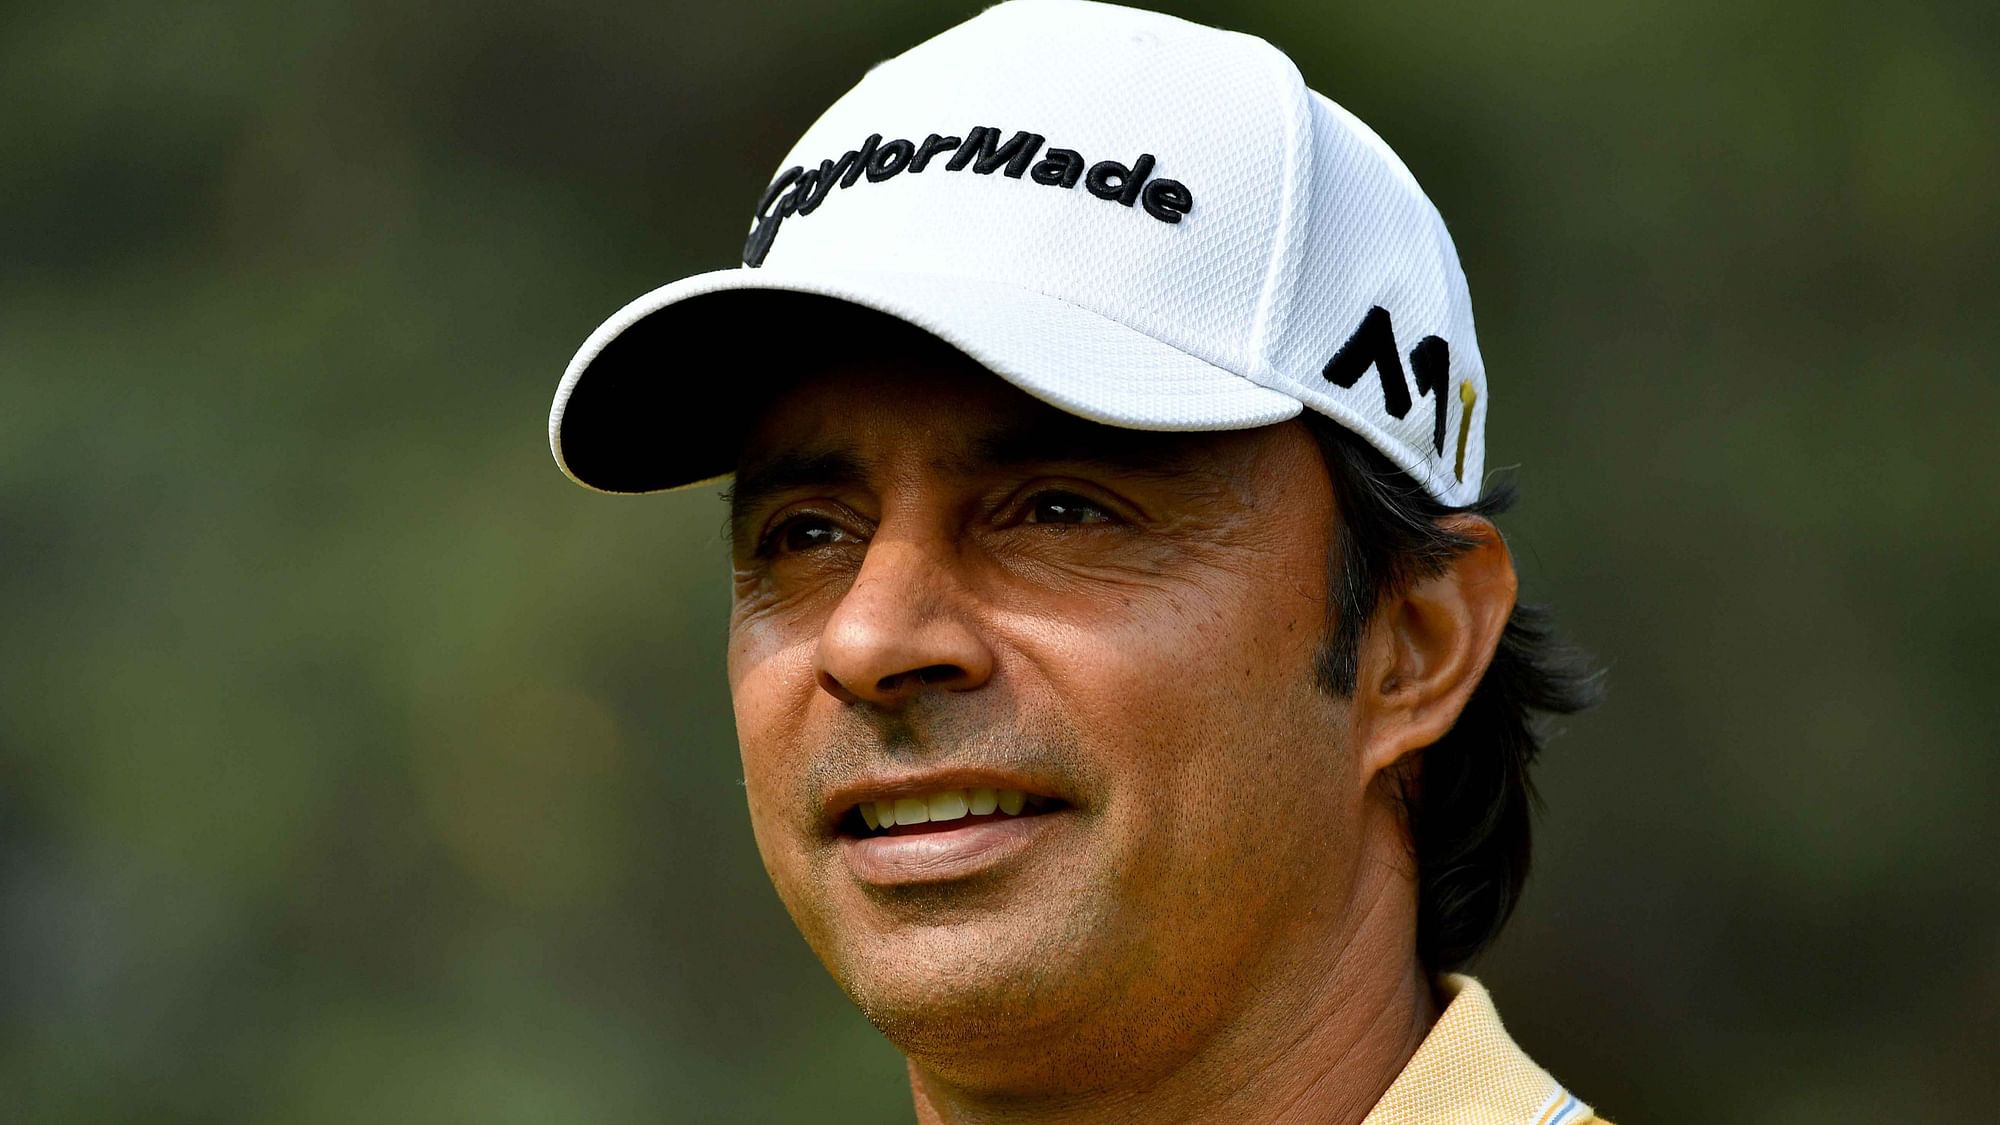 File picture of Indian golfer Jyoti Randhawa, who was arrested on poaching charges in Uttar Pradesh on 26 December.